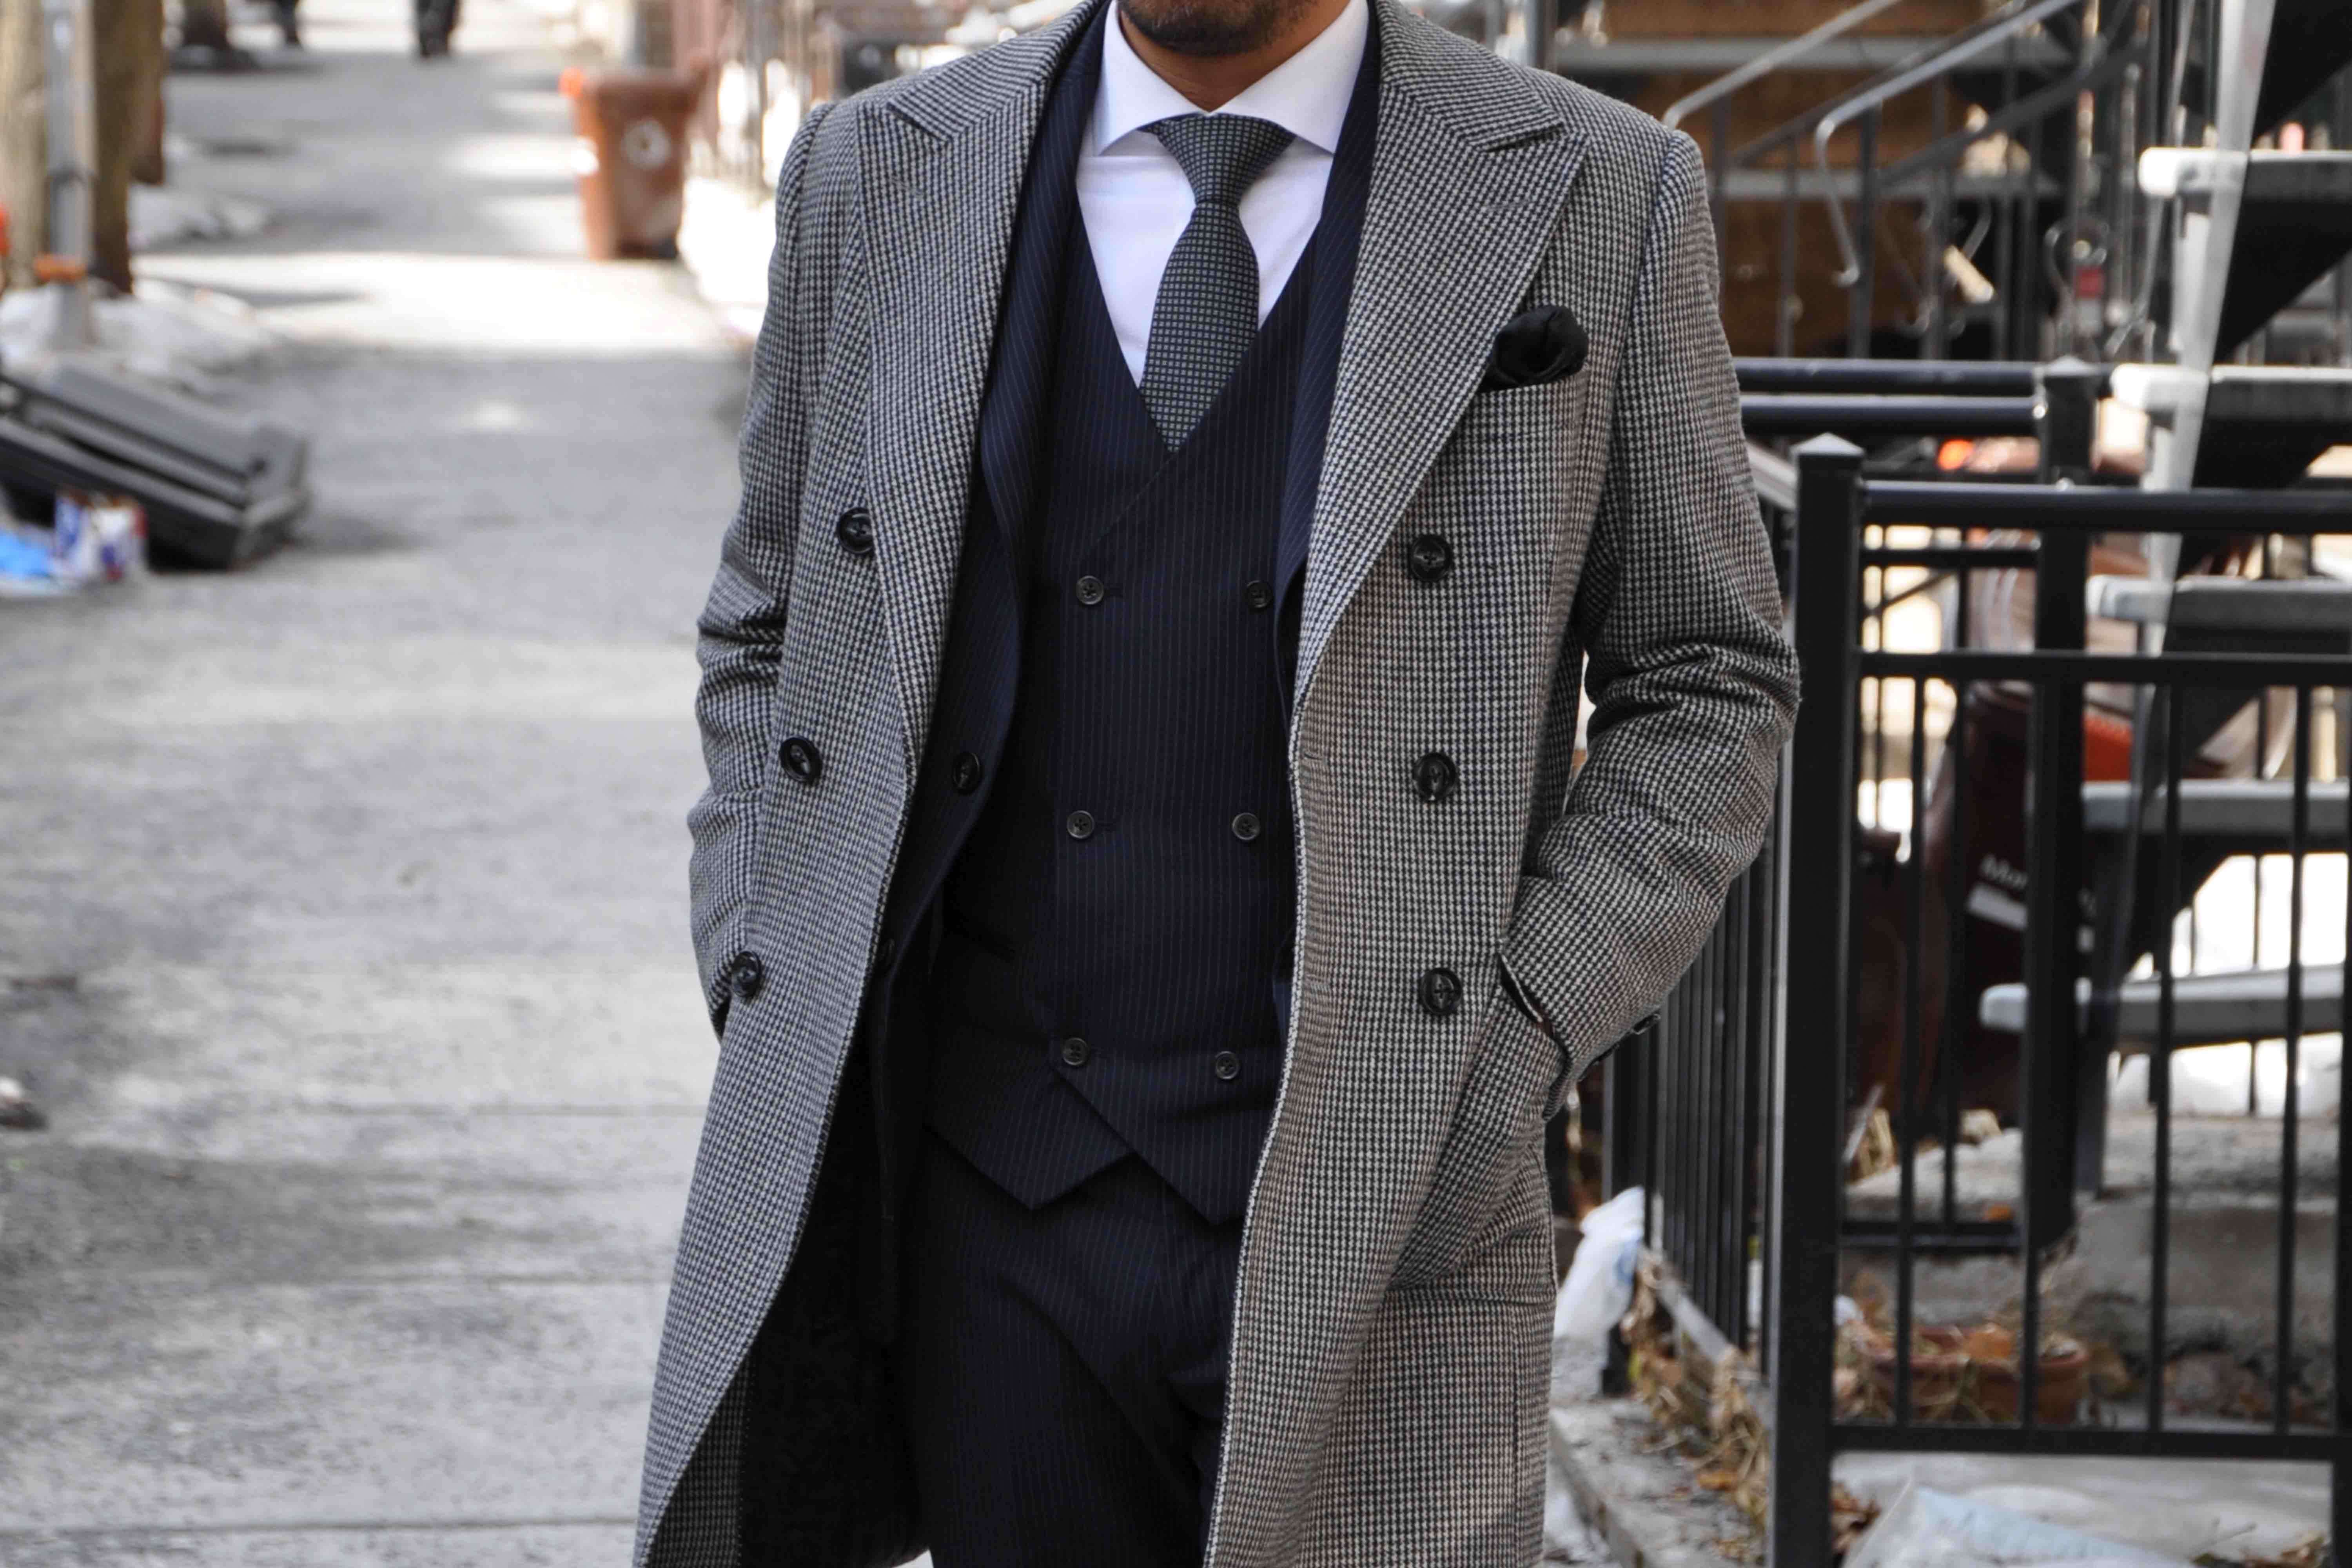 The Difference between a Topcoat and an Overcoat